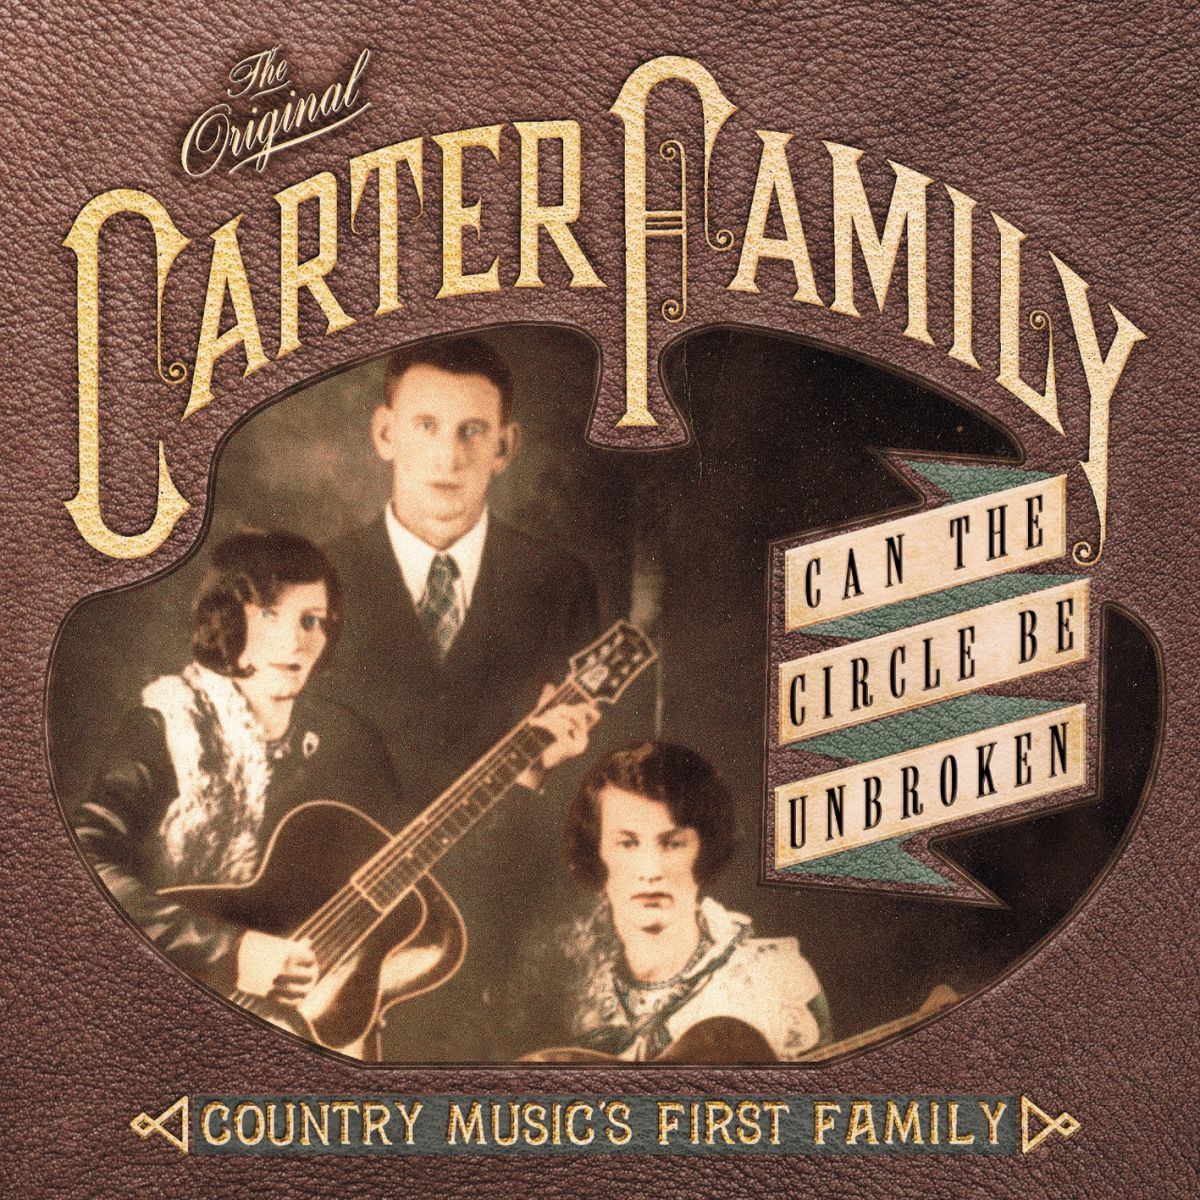 The Carter Family – Can The Circle Be Unbroken